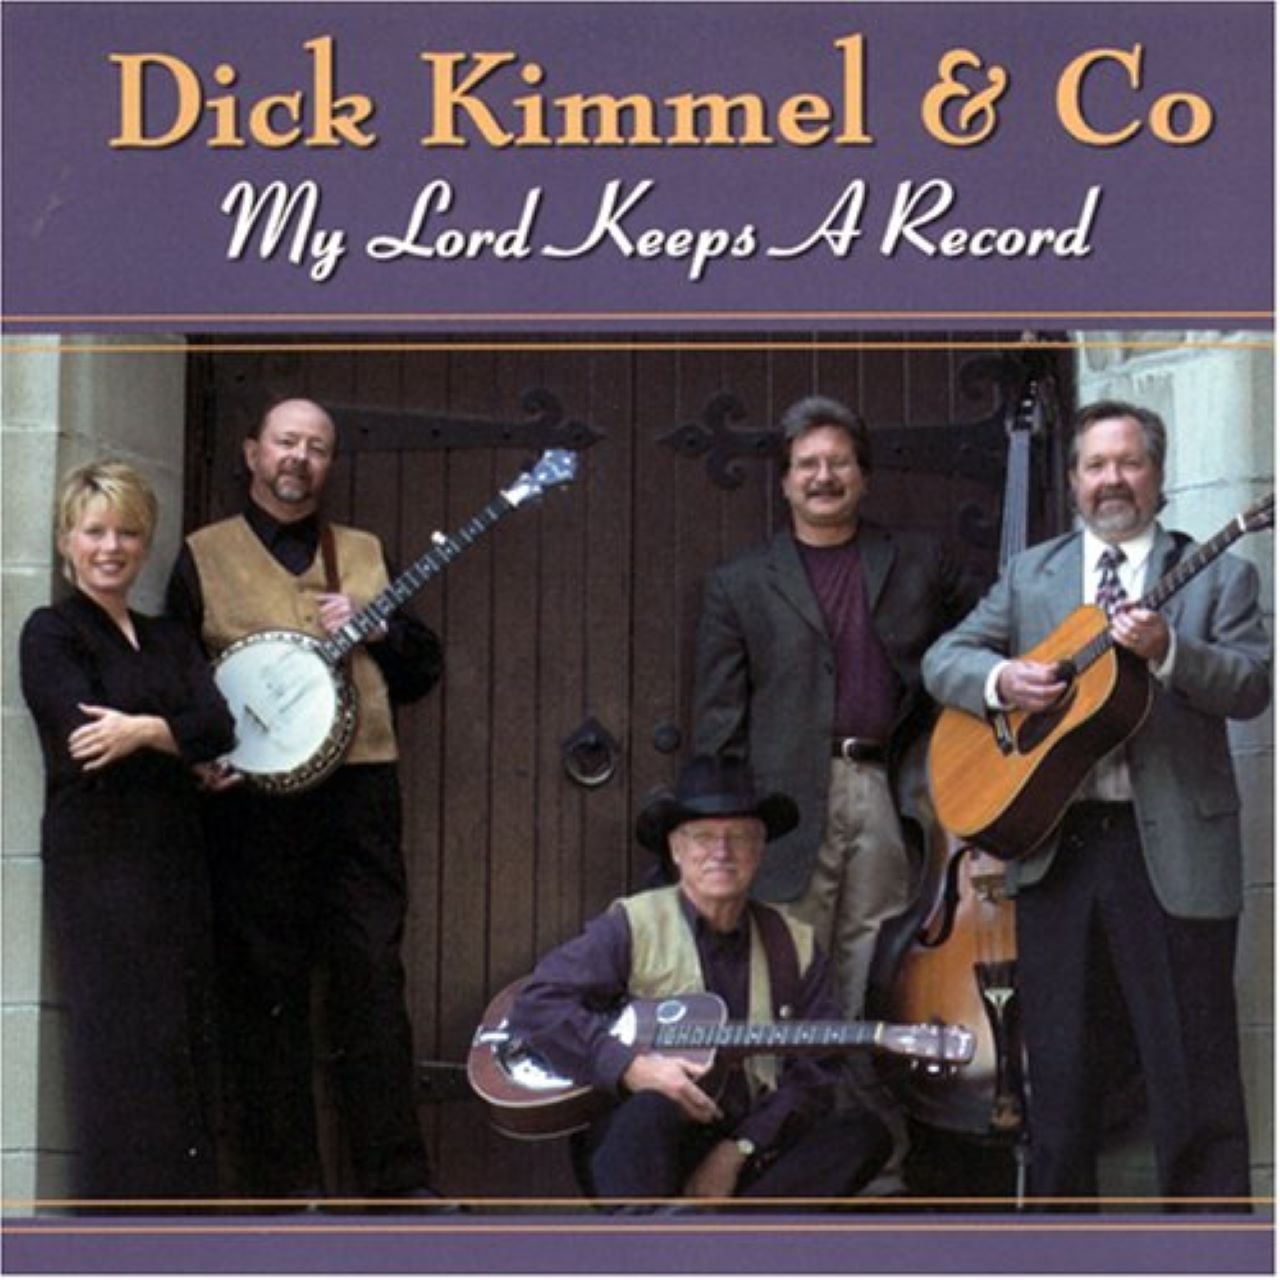 Dick Kimmel & Co. - My Lord Keeps A Record cover album